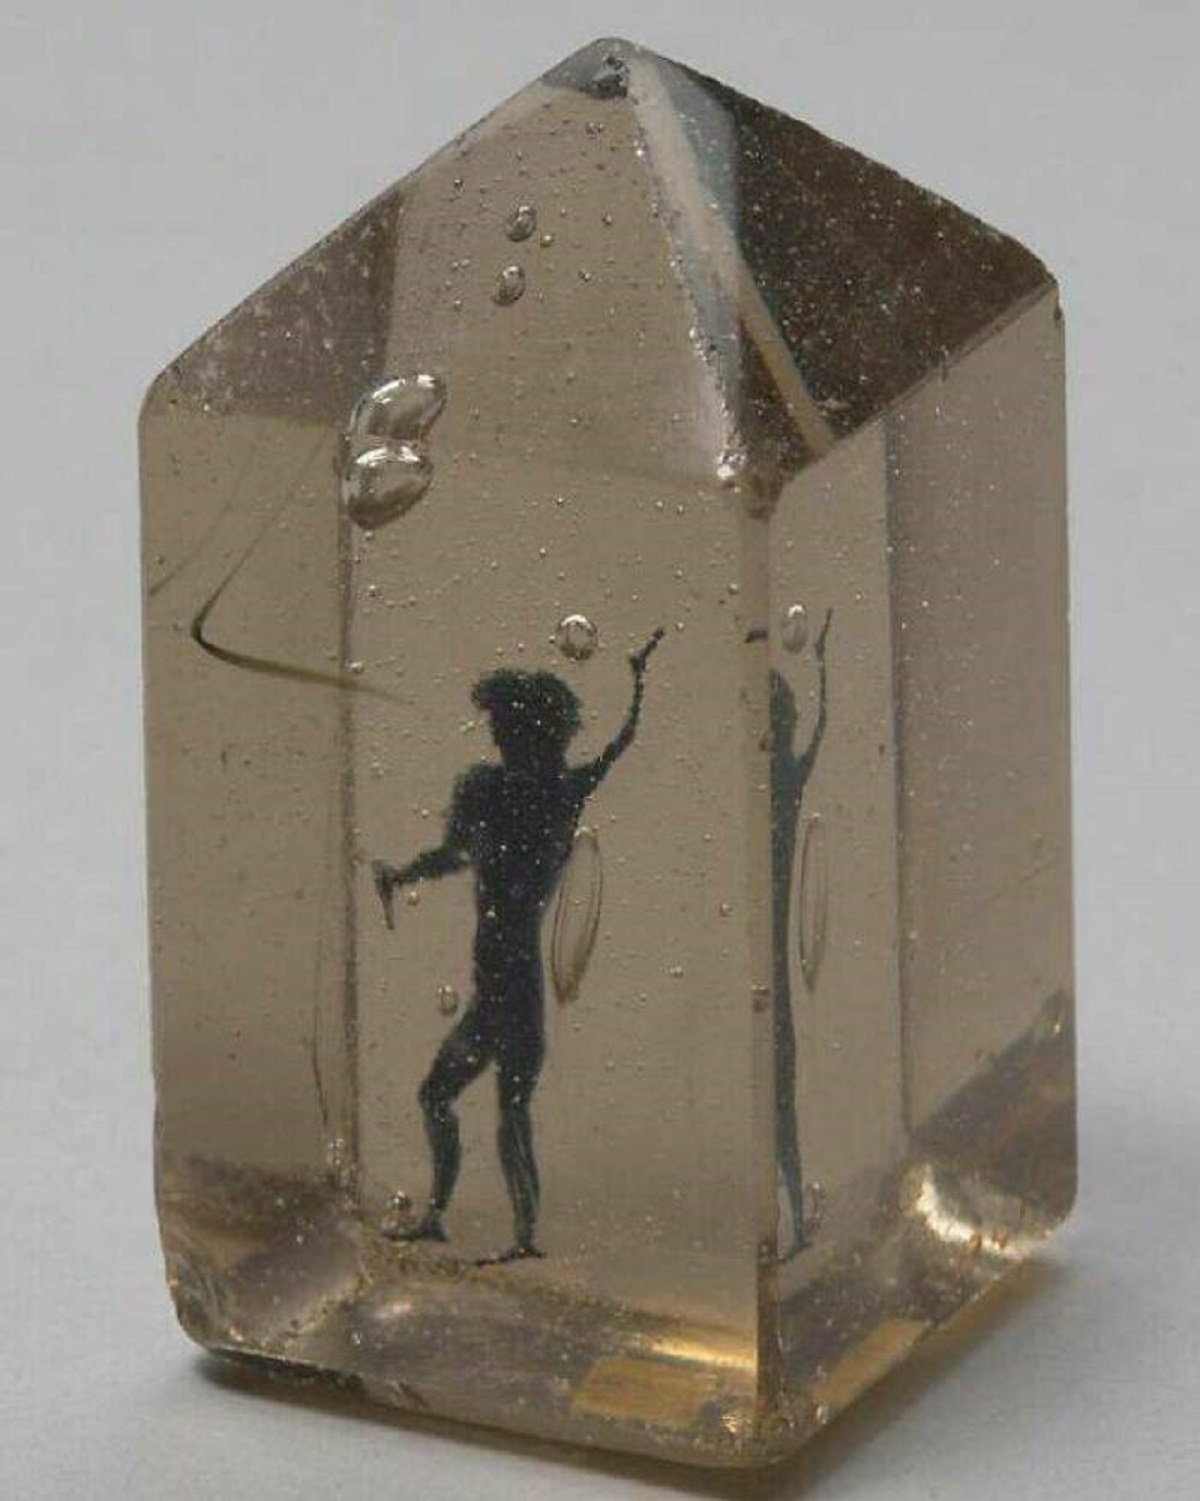 ""Devil In The Glass". Cast In Glass, The Small Figure Of A Devil Is Made Of Black Lead"